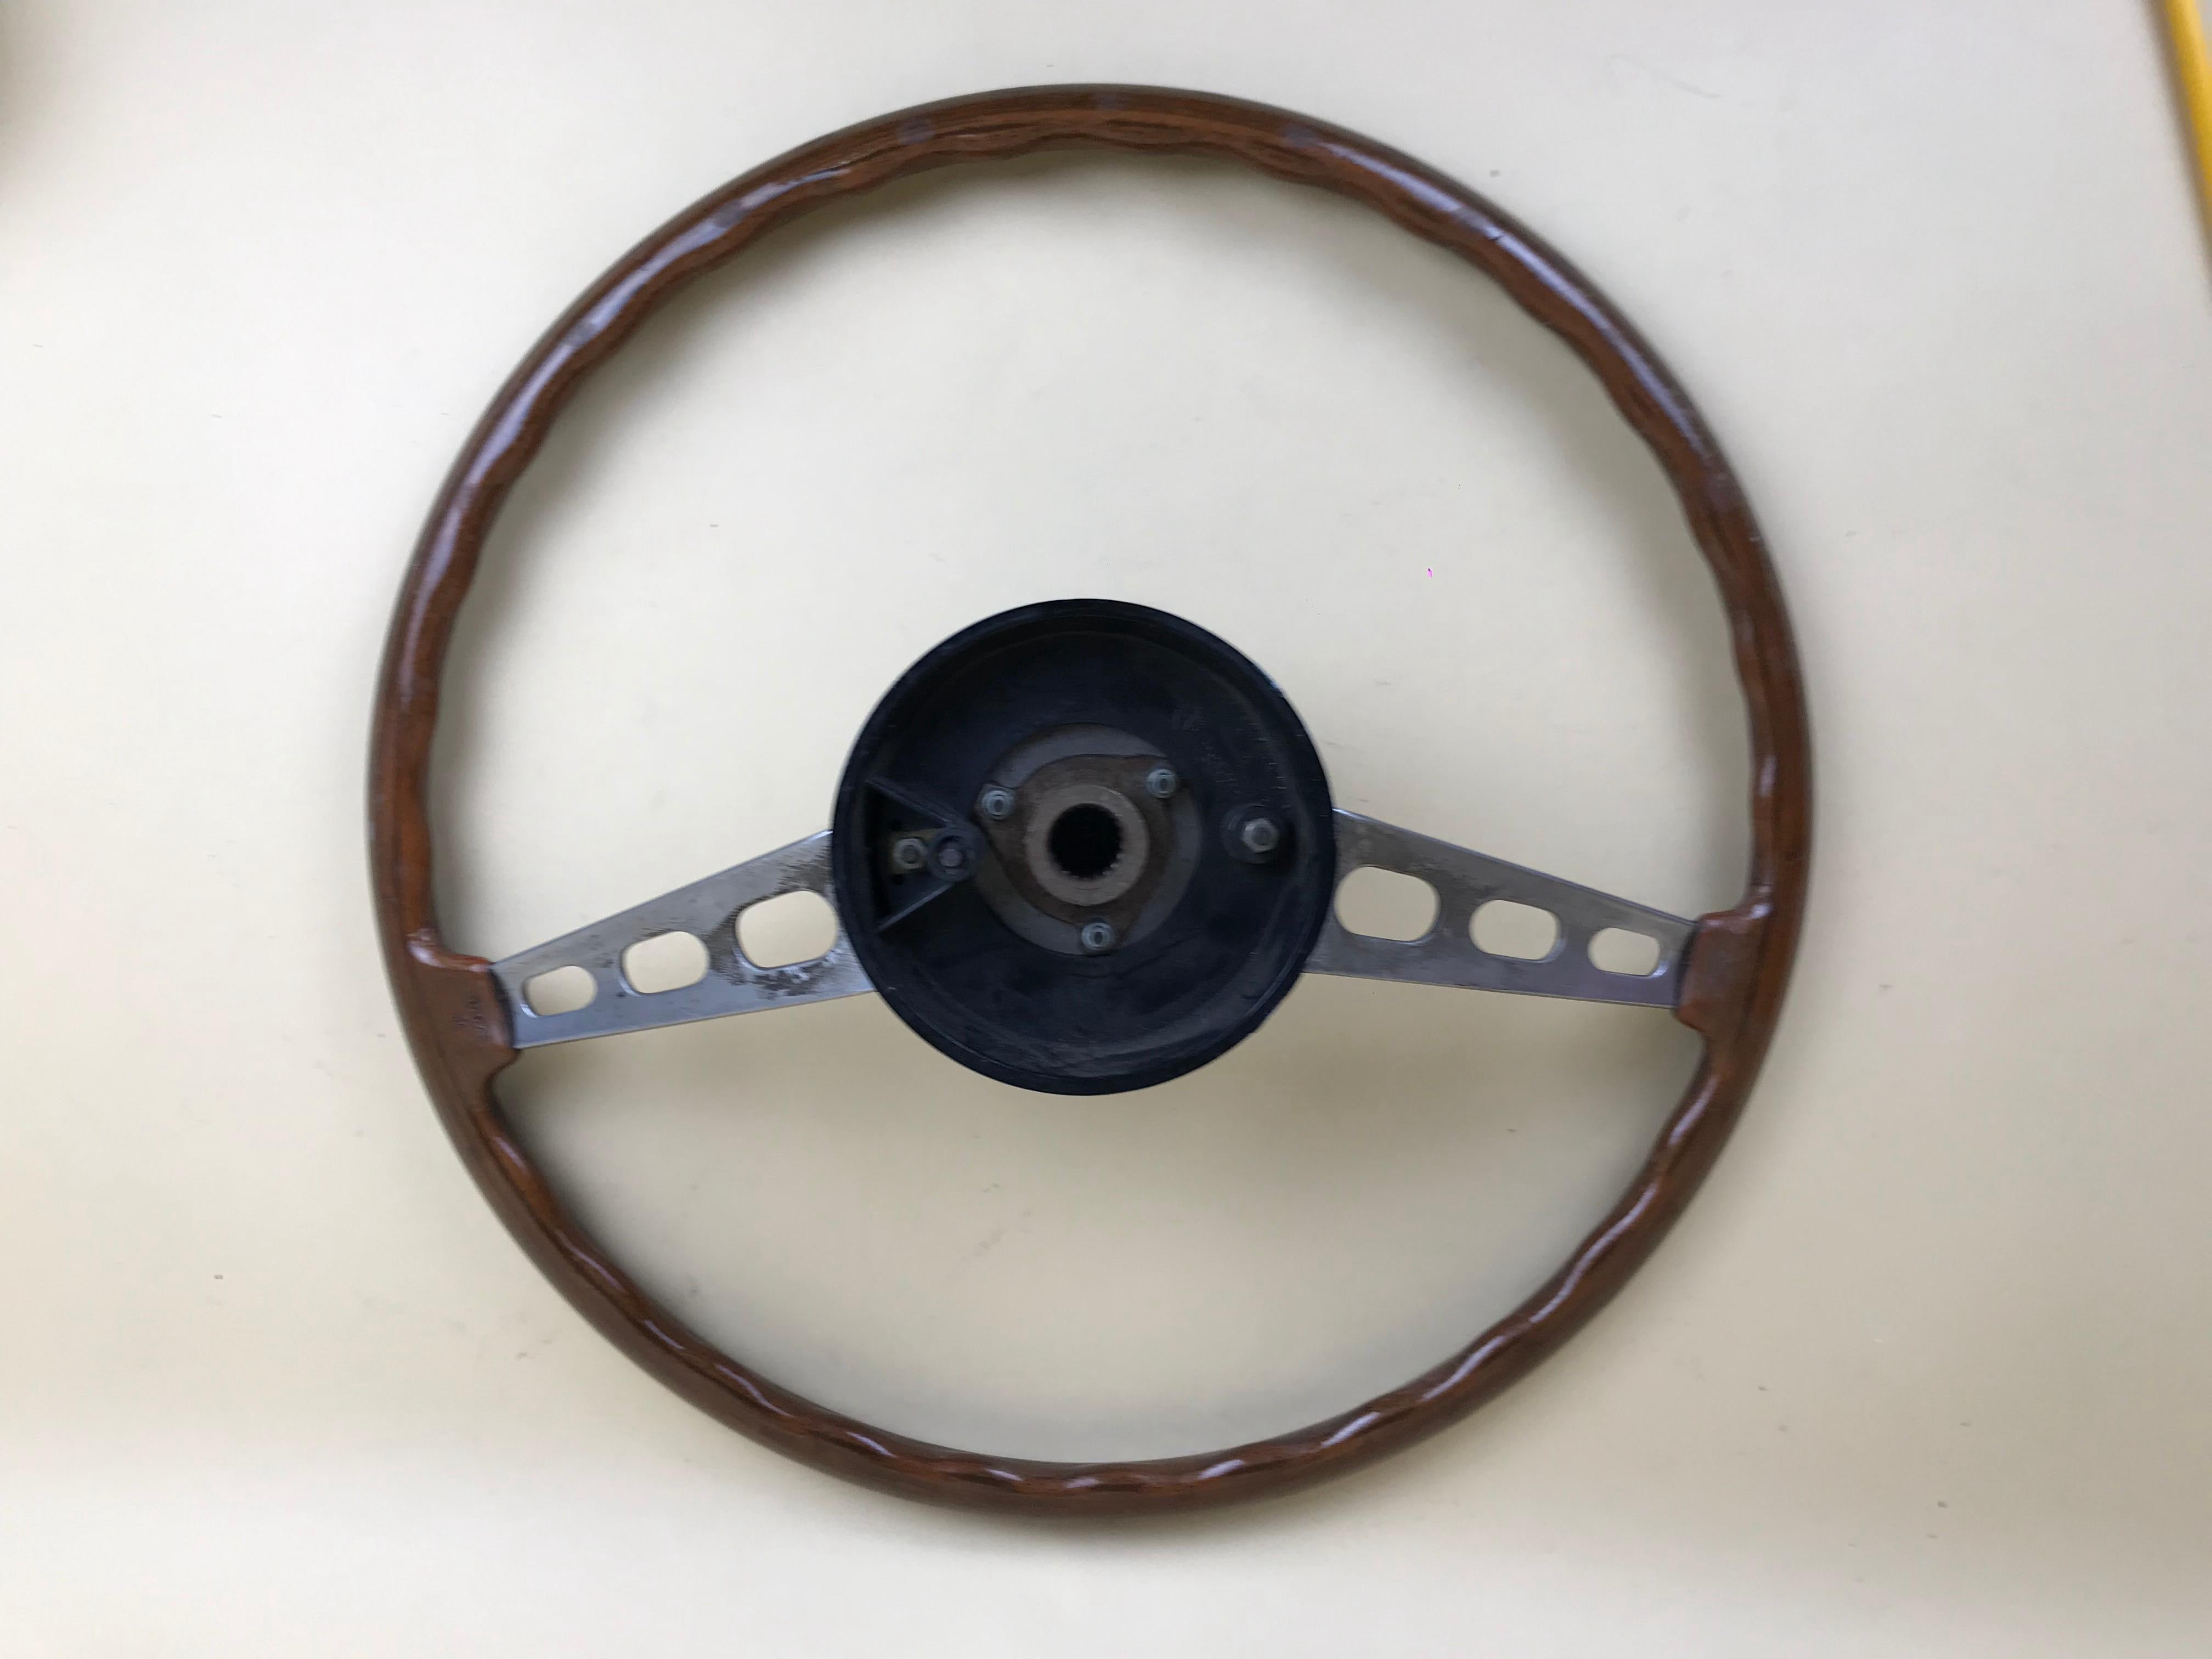 1960s Vintage Wooden and Metal Lancia Steering Wheel Made in Italy For Sale 8